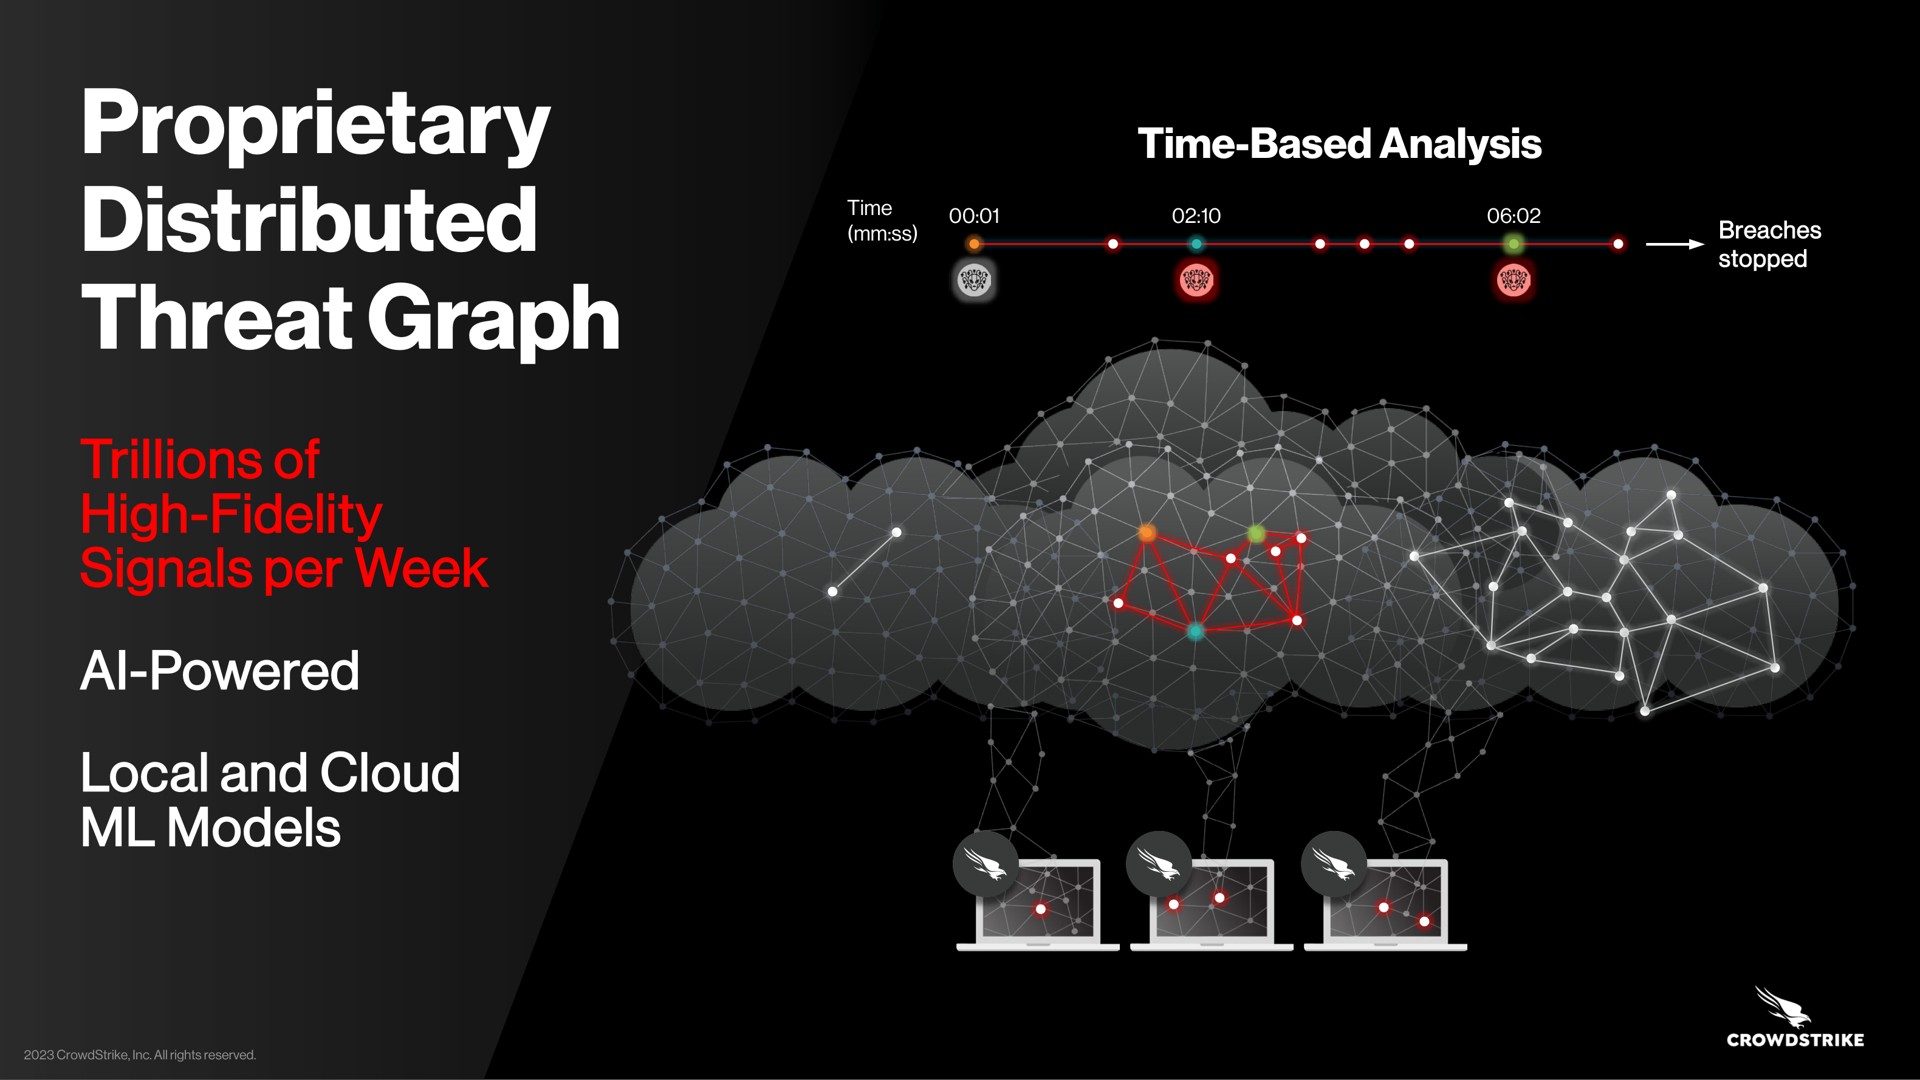 time based analysis proprietary distributed threat graph trillions of high fidelity signals per week powered local and cloud models powered at | Crowdstrike